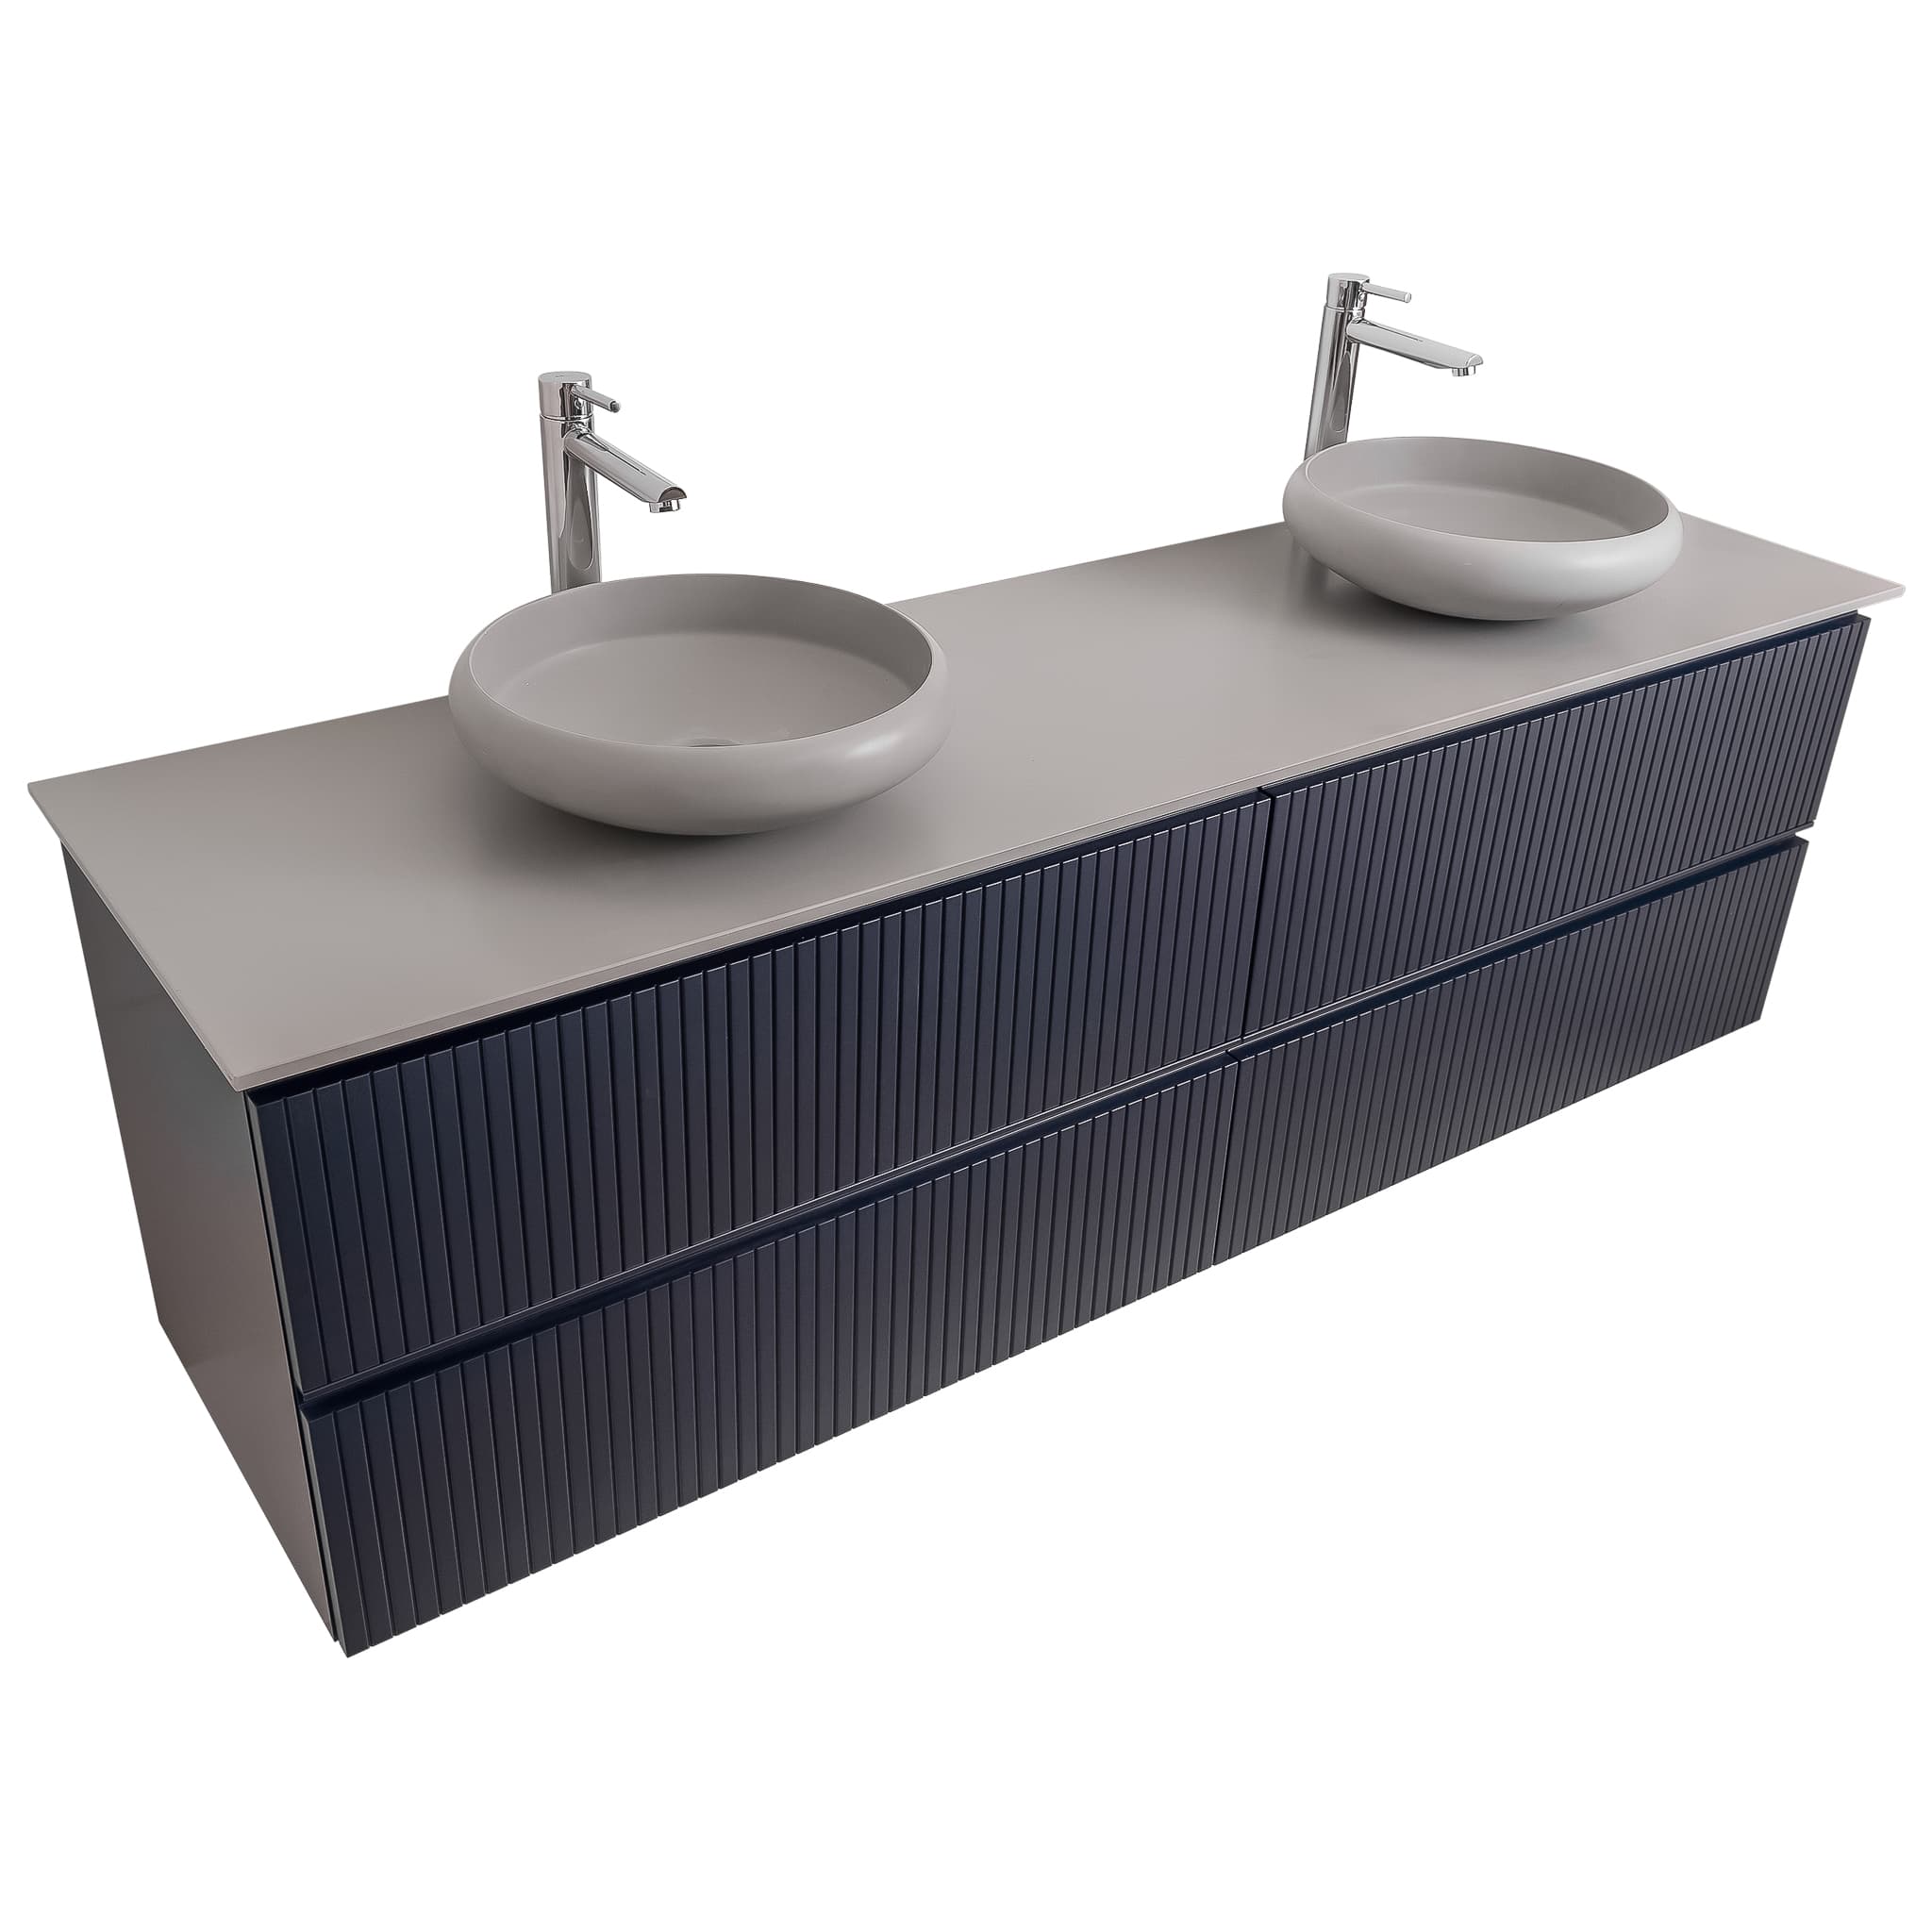 Ares 63 Matte Navy Blue Cabinet, Solid Surface Flat Grey Counter And Two Round Solid Surface Grey Basin 1153, Wall Mounted Modern Vanity Set